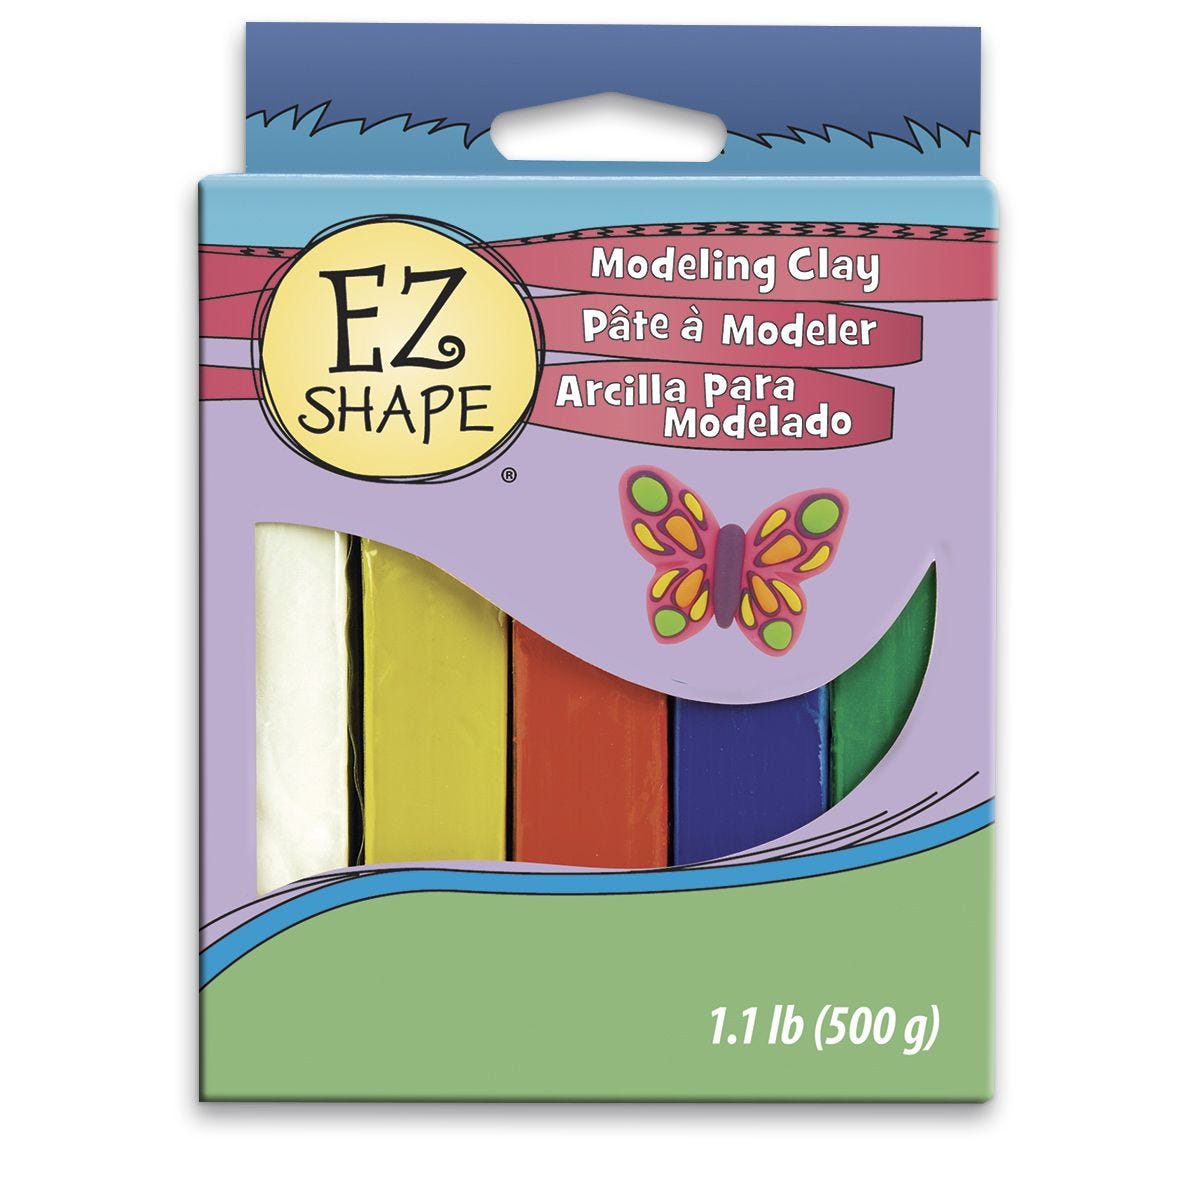 Hello Hobby EZ Shape 1 lb. Non-Drying Primary Modeling Clay 